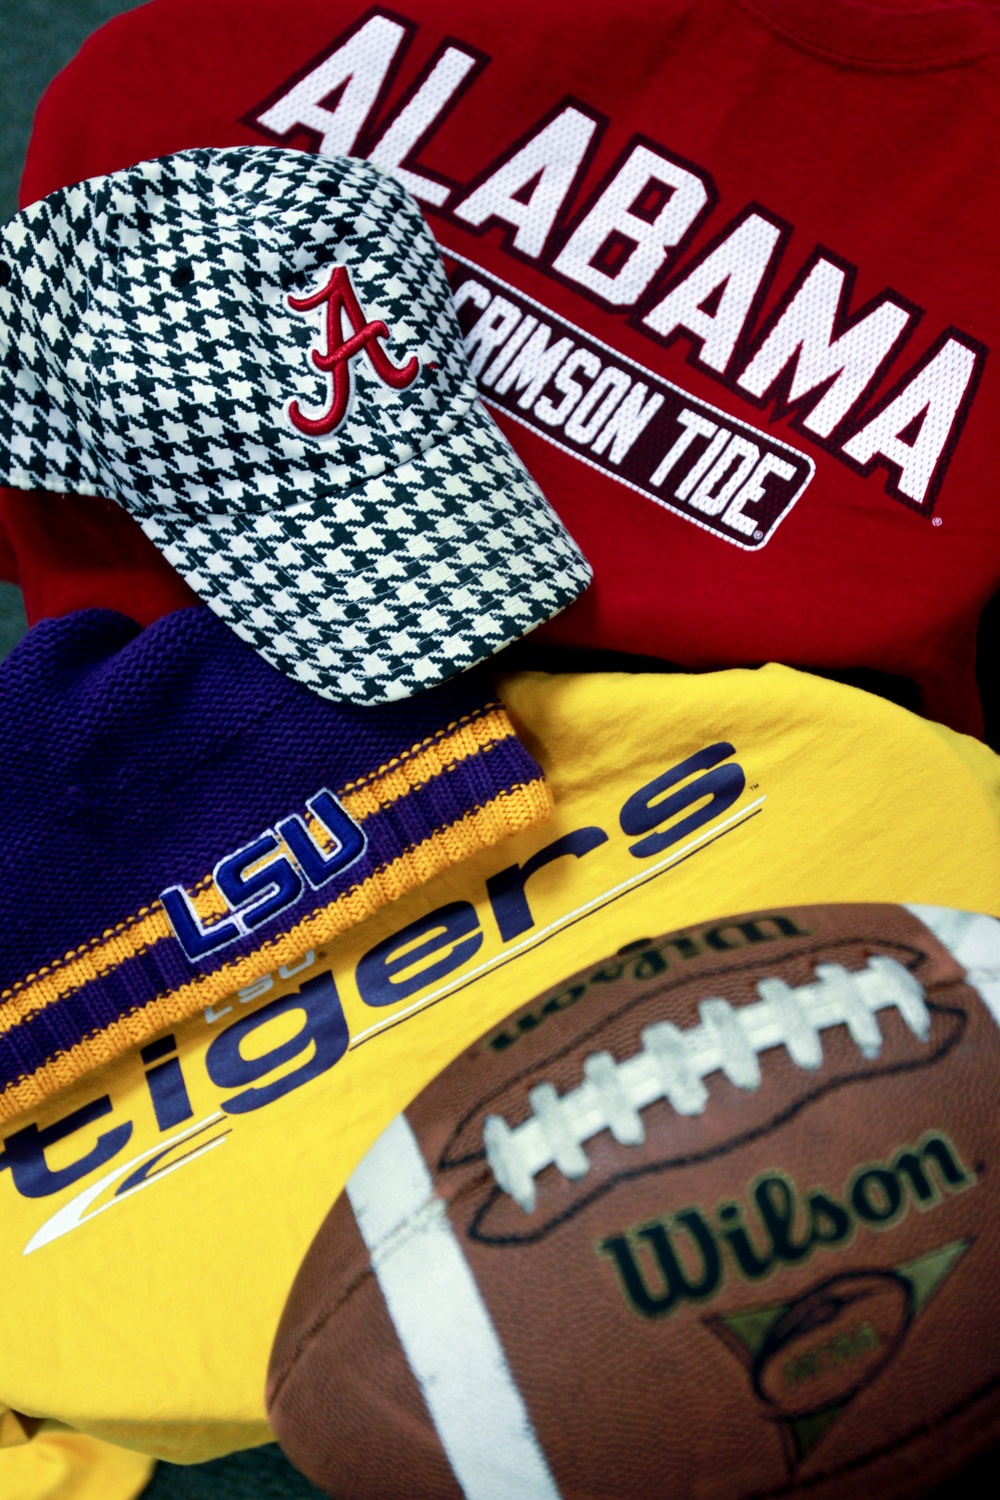 College football approves four team playoff starting 2014